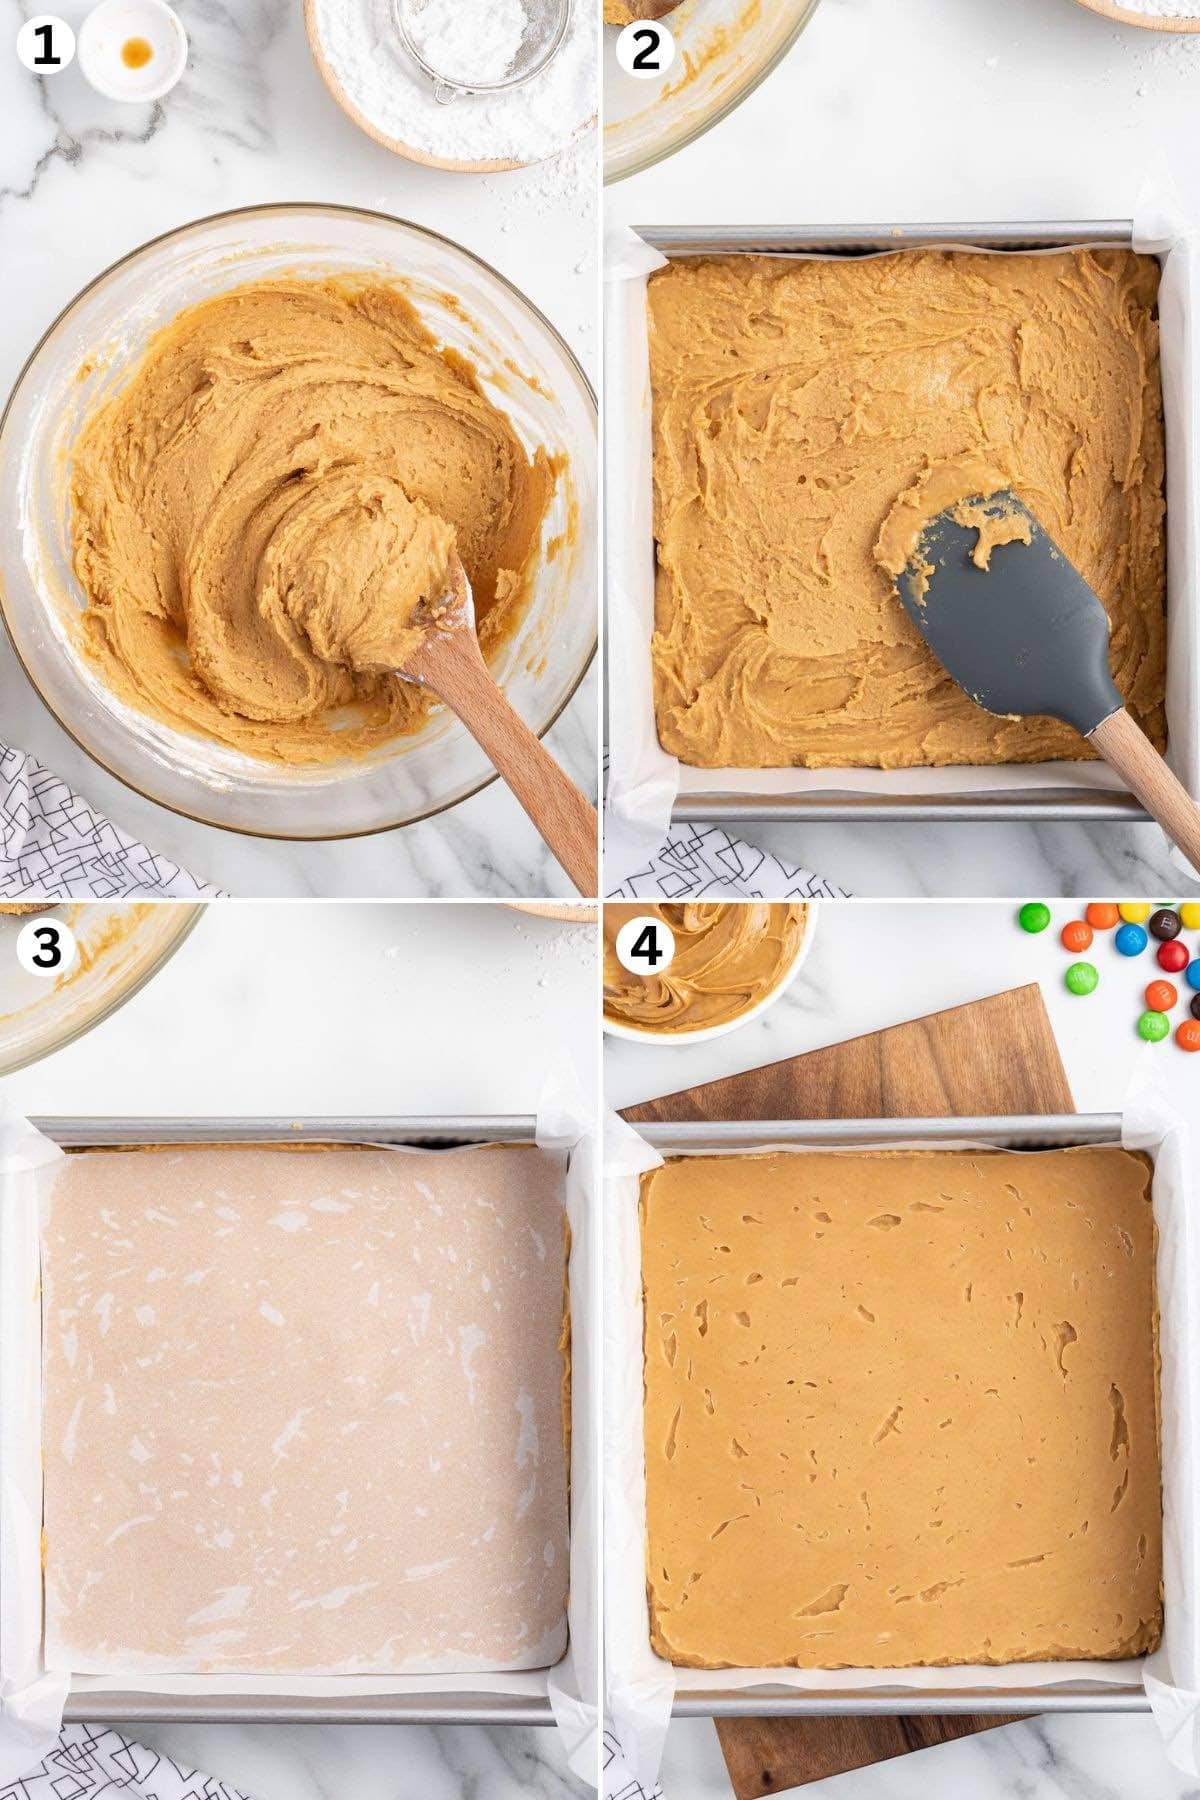 mix fudge ingredients in a bowl. pour into baking pan. place parchment paper on top to smooth and flatten it. 